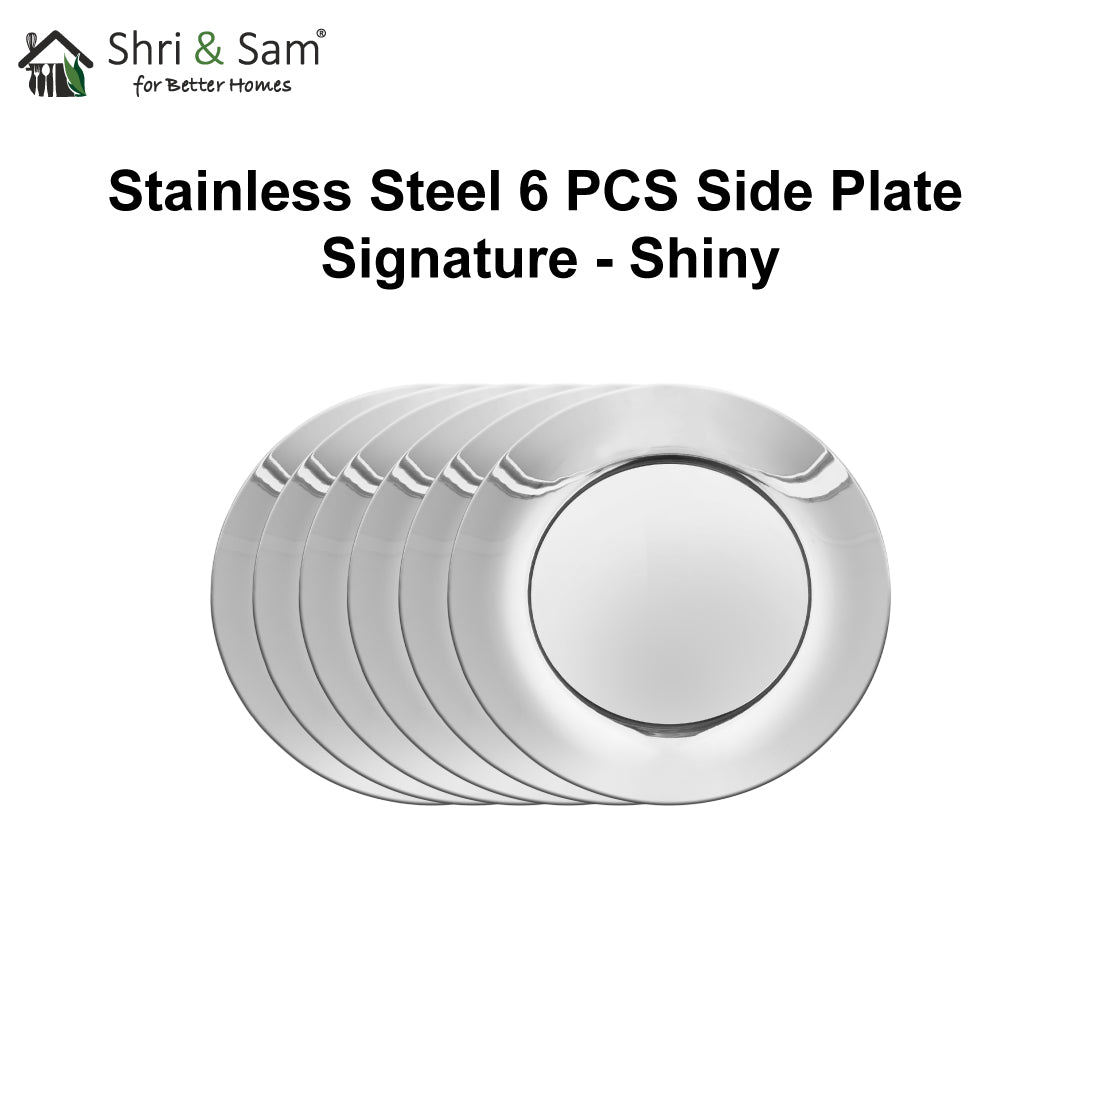 Stainless Steel 6 PCS Side Plate Signature - Shiny